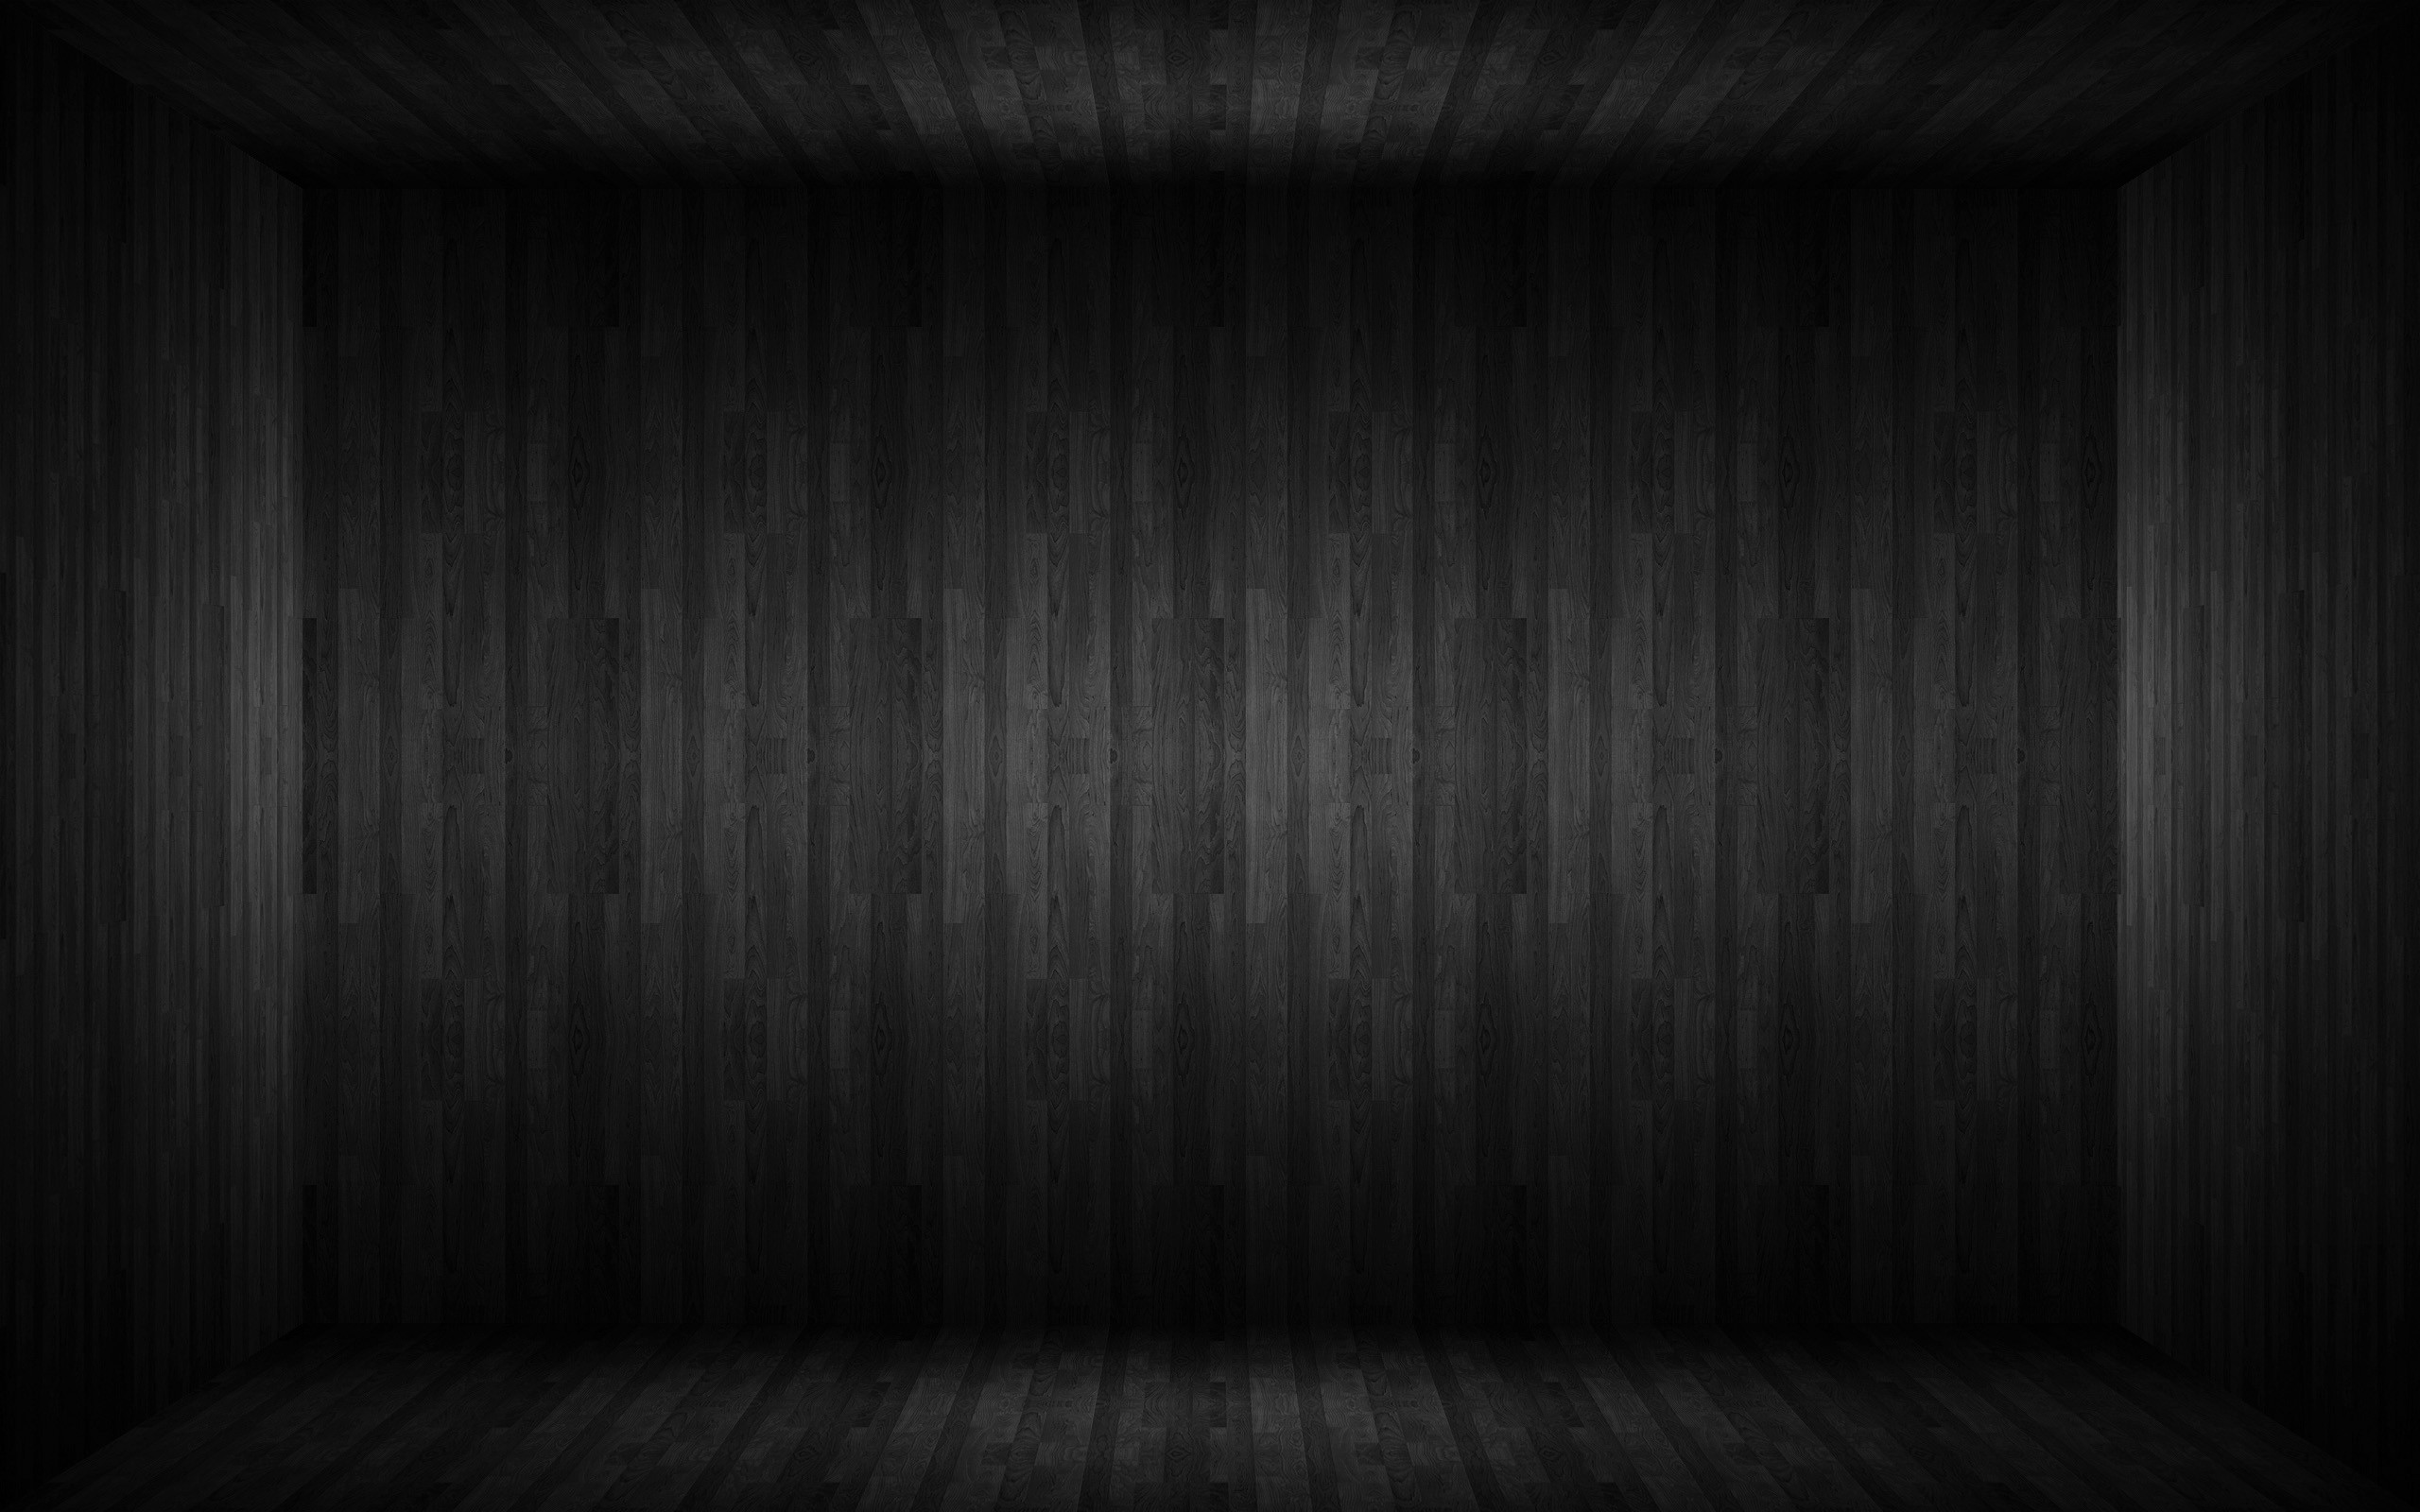 2560x1600 wood grain hd backgrounds - page 3 of 3 - wallpaper.wiki